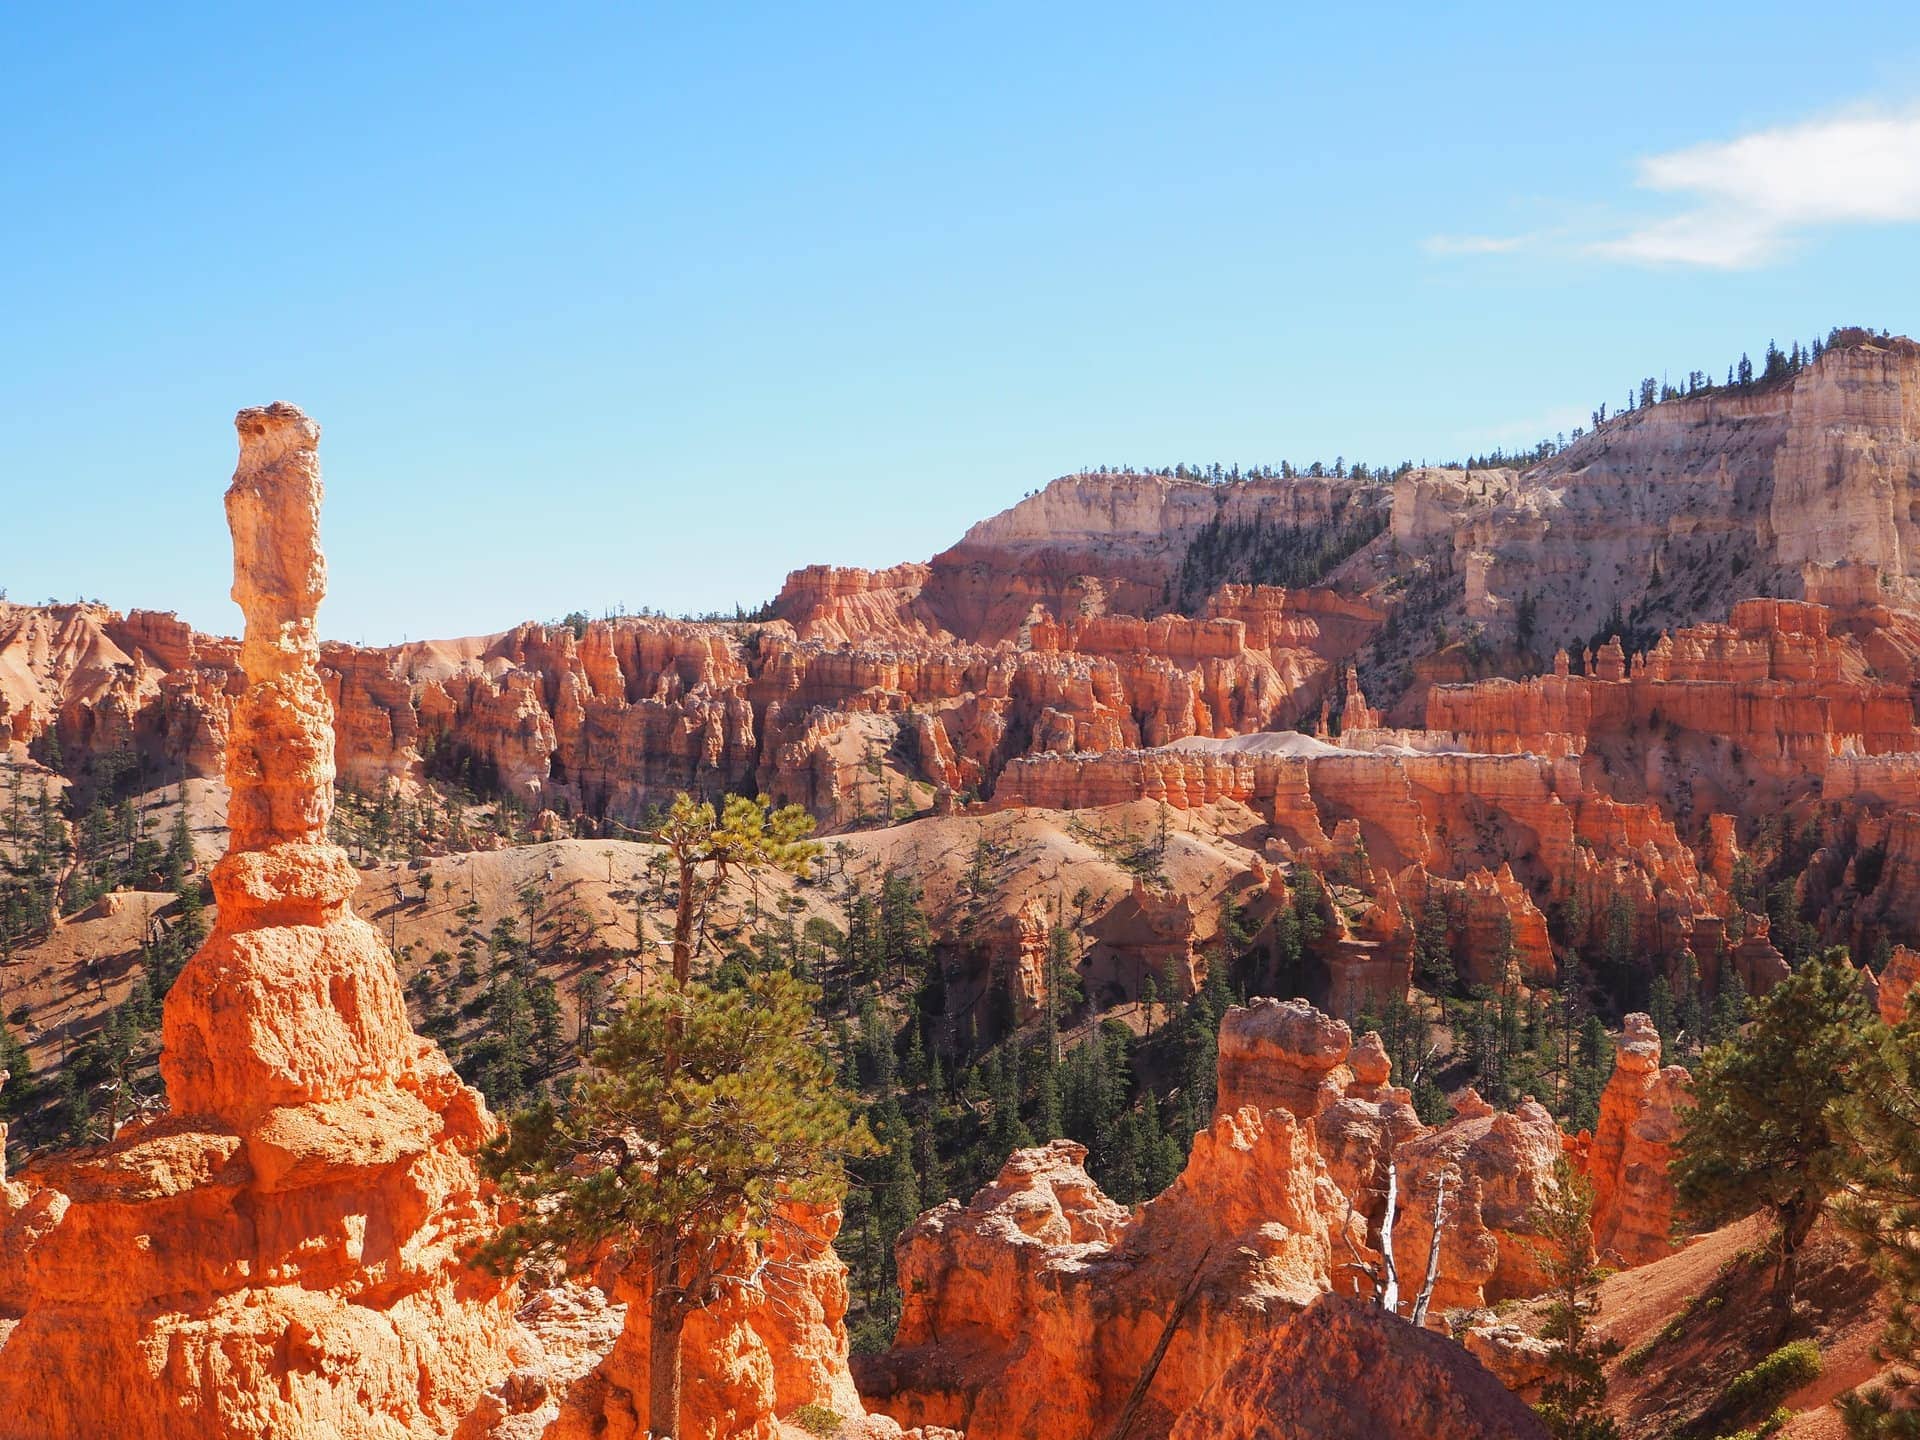 Bryce canyon is full of incredible hoodoo rock formations